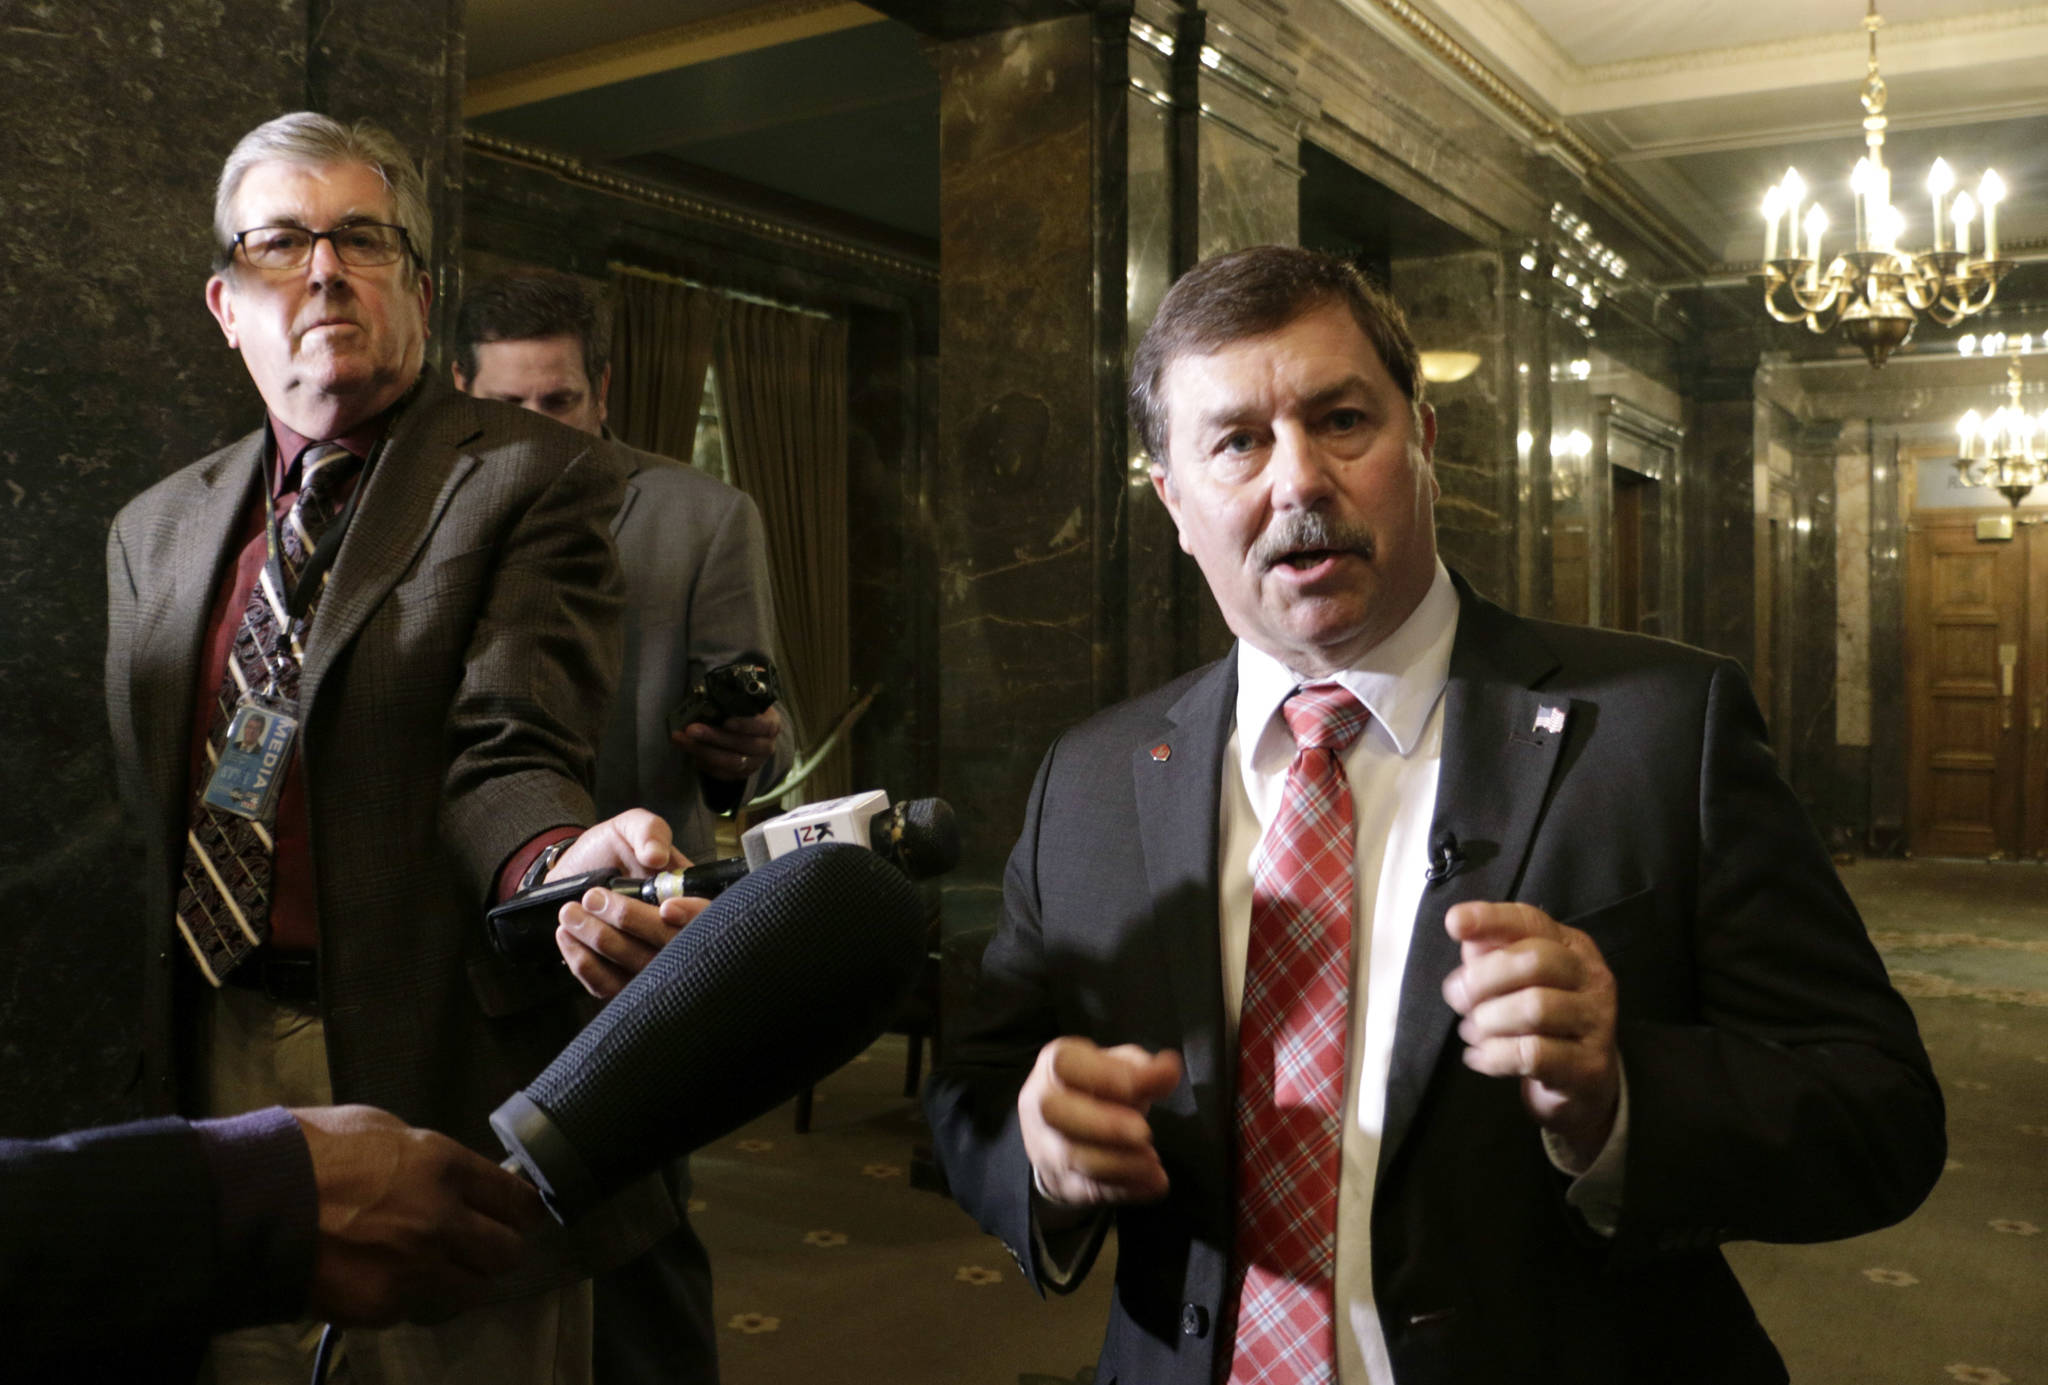 Republican Senate Majority Leader Mark Schoesler talks to the media in the Senate wings after a state budget deal was announced Wednesday in Olympia. (Rachel La Corte/The Associated Press)